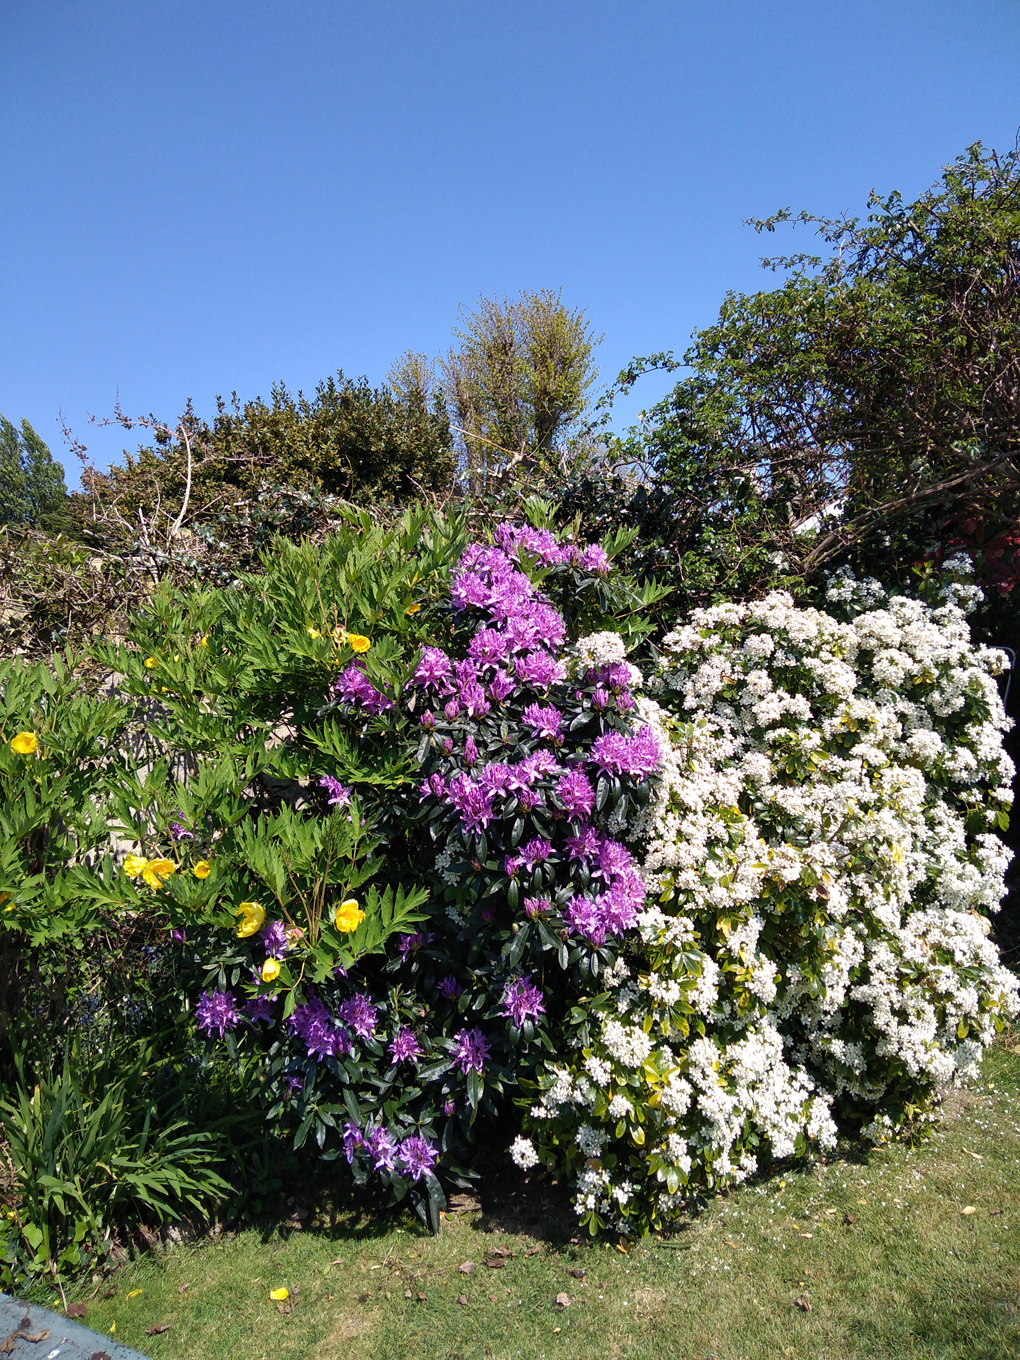 There are flowering yellow Treepeanonies, purple Rhododendrons and a white Choysia Bush with a bright blue sky above in this picture